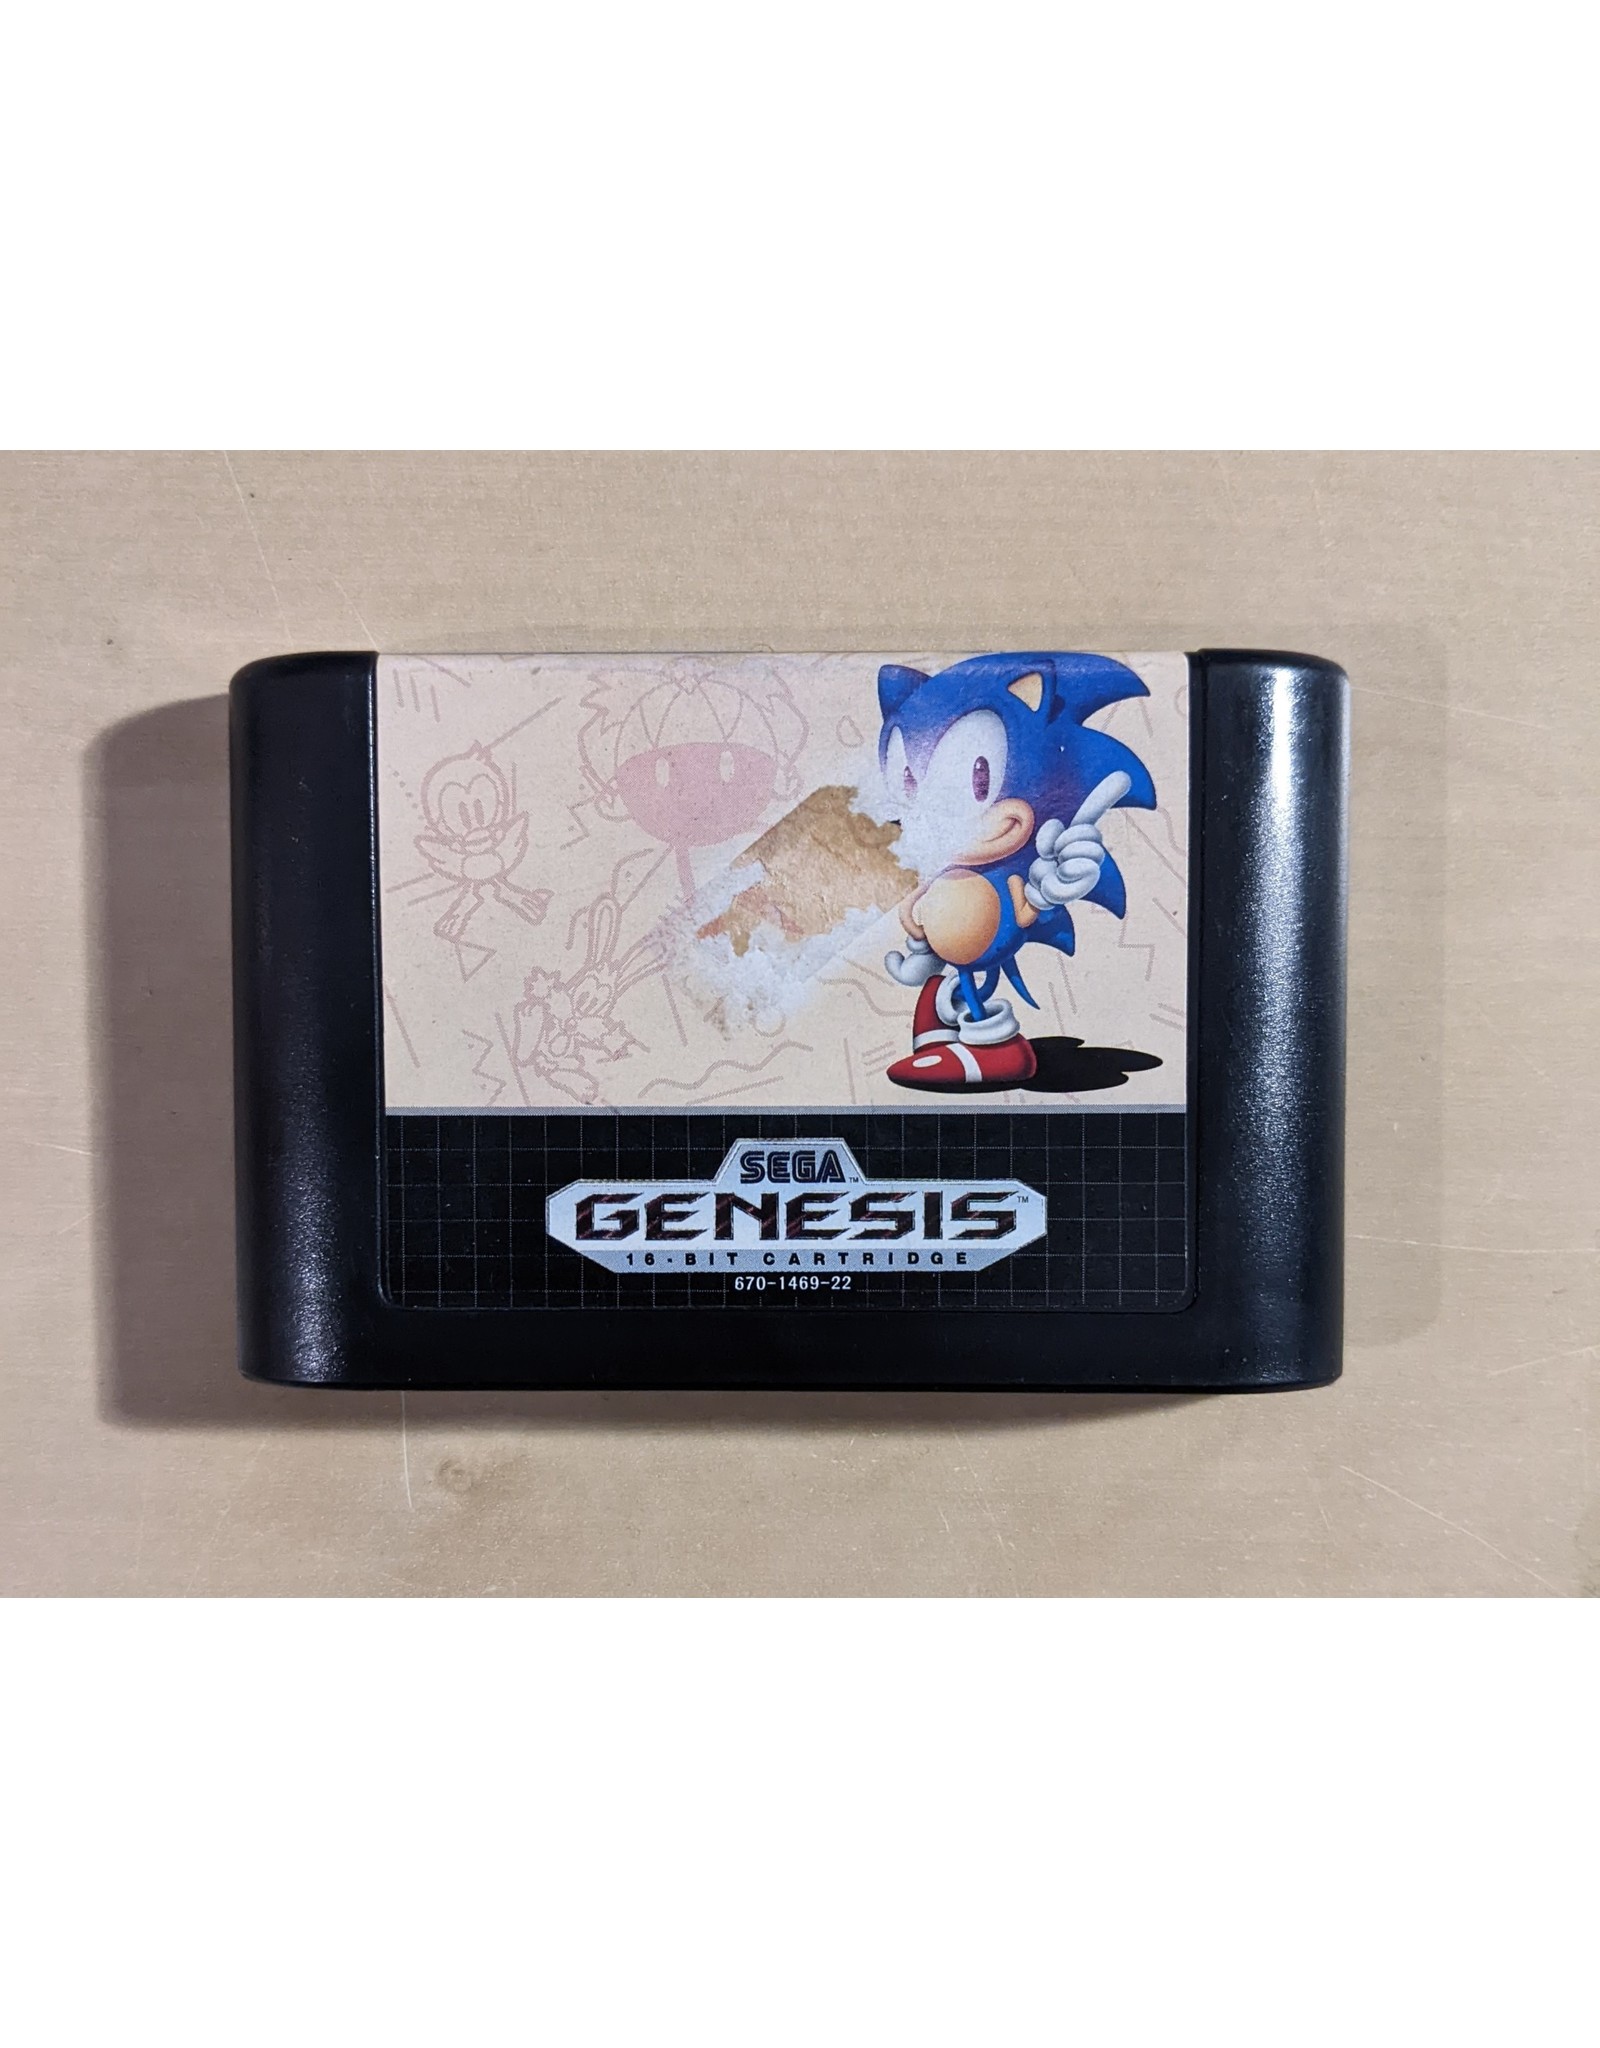 Used Game - Genesis - Sonic The Hedgehog [Canadian Variant, Cart Only]